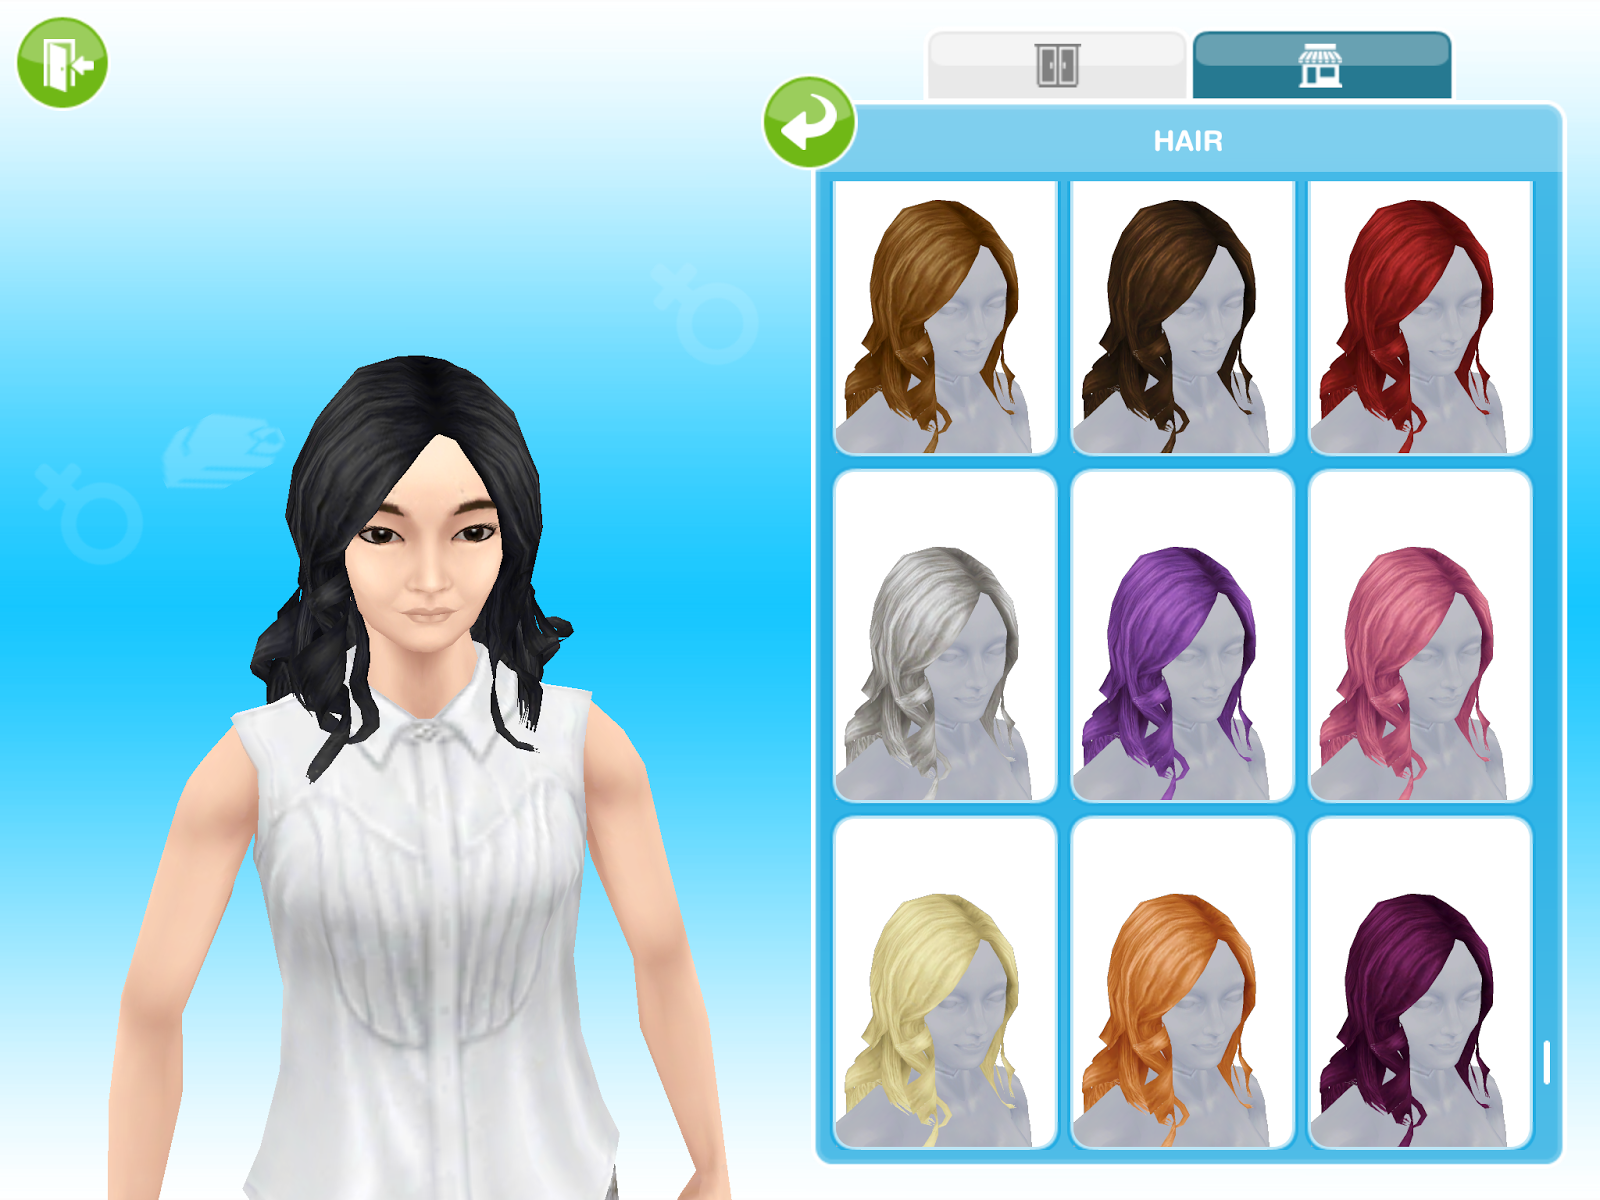 The Sims FreePlay - Try a new style! #longhairdontcare